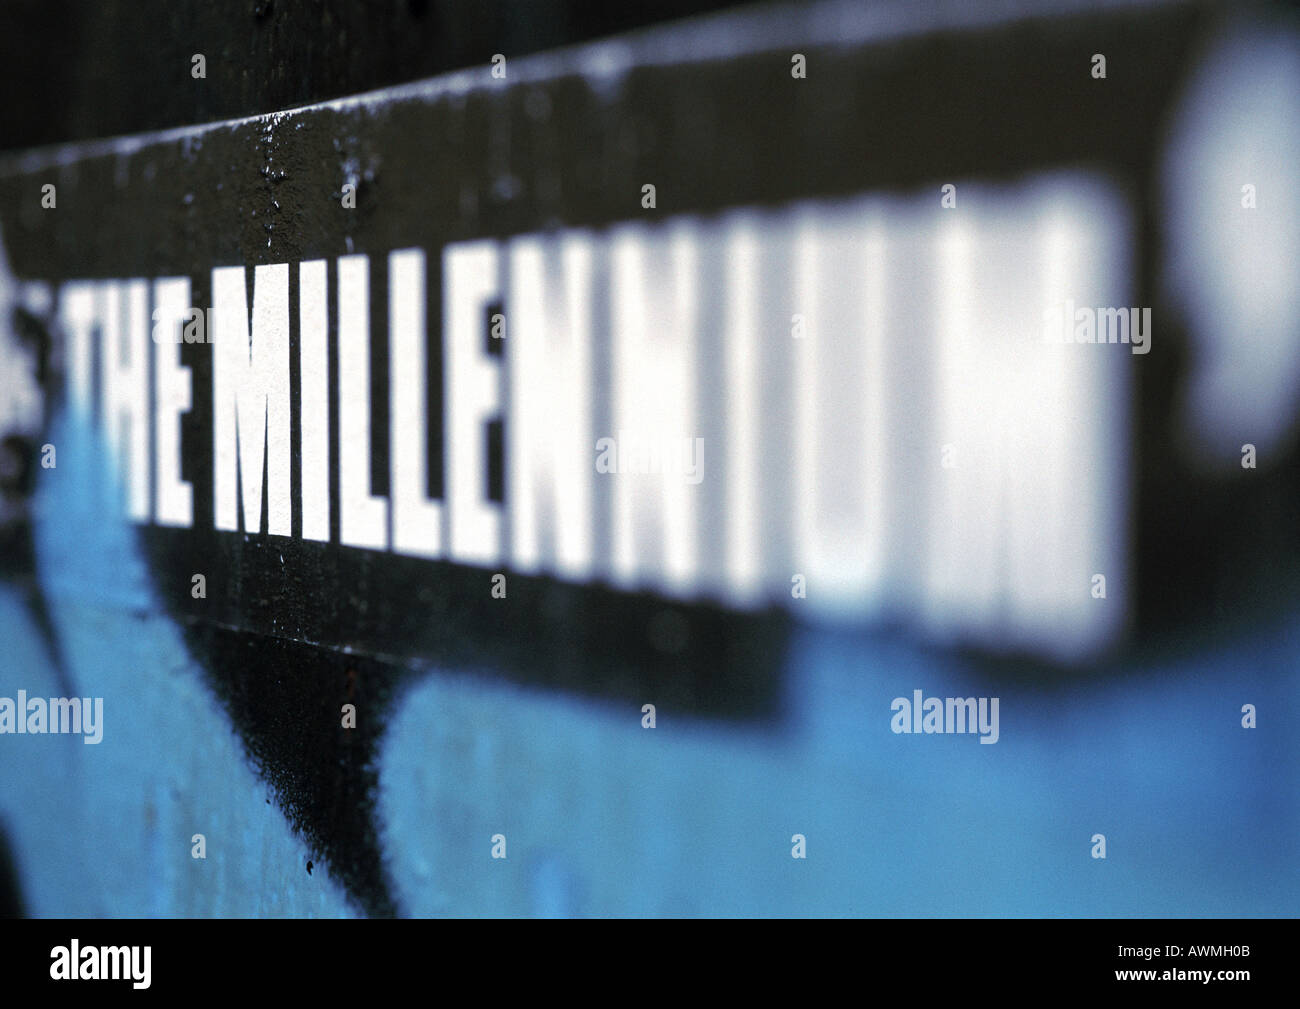 The millenium text printed in capital letters, blurred Stock Photo